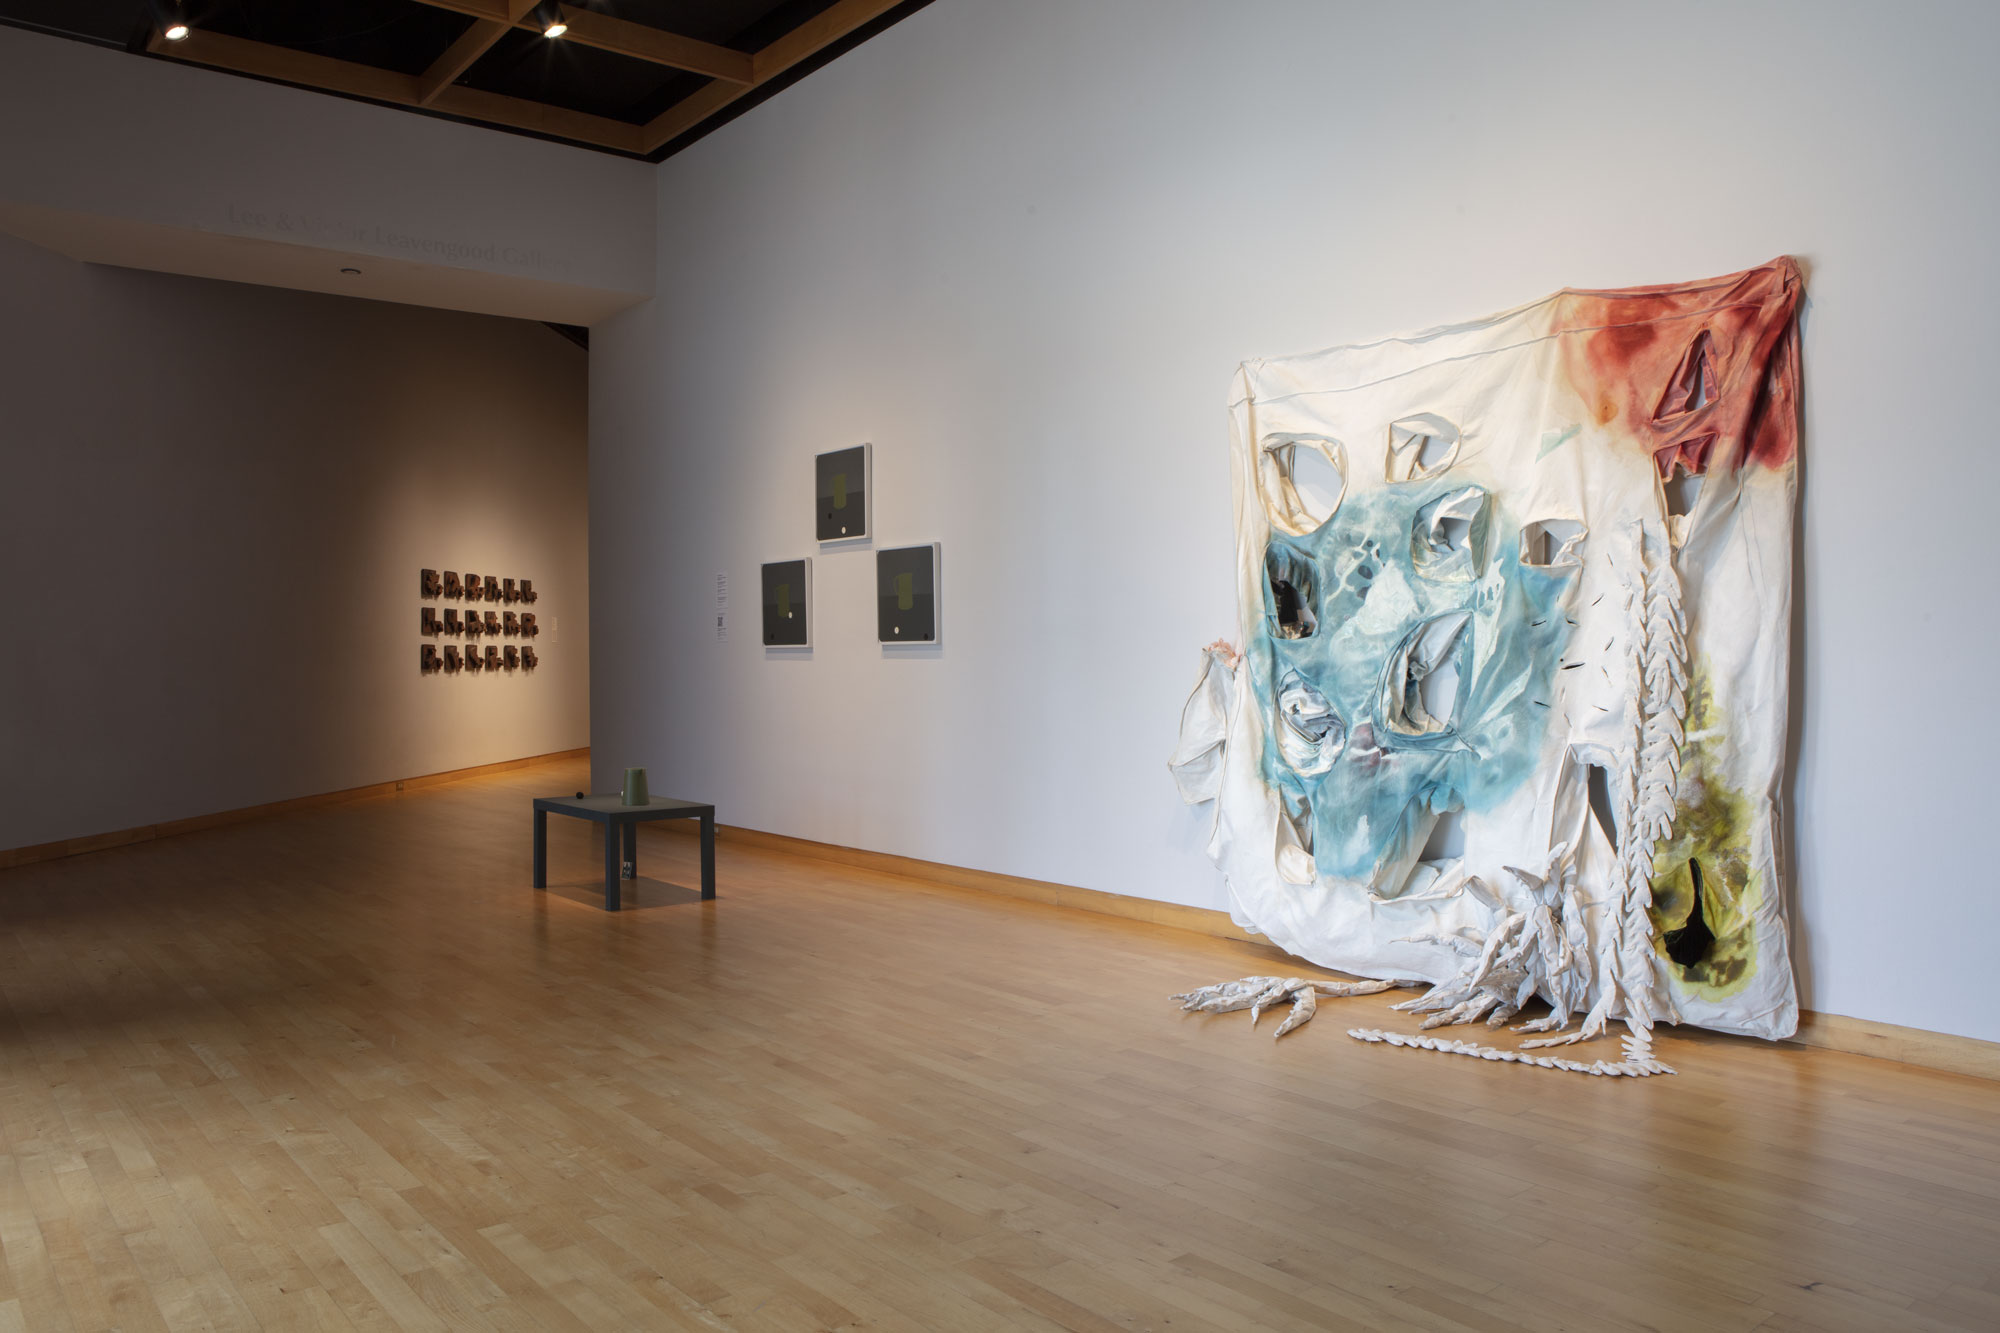 Installation view of Skyway 20/21 exhibition at USF Contemporary Art Museum. Left to right: works by Kodi Thompson, Cynthia Mason, Casey McDonough, and Ry McCollough. Photo: Will Lytch.